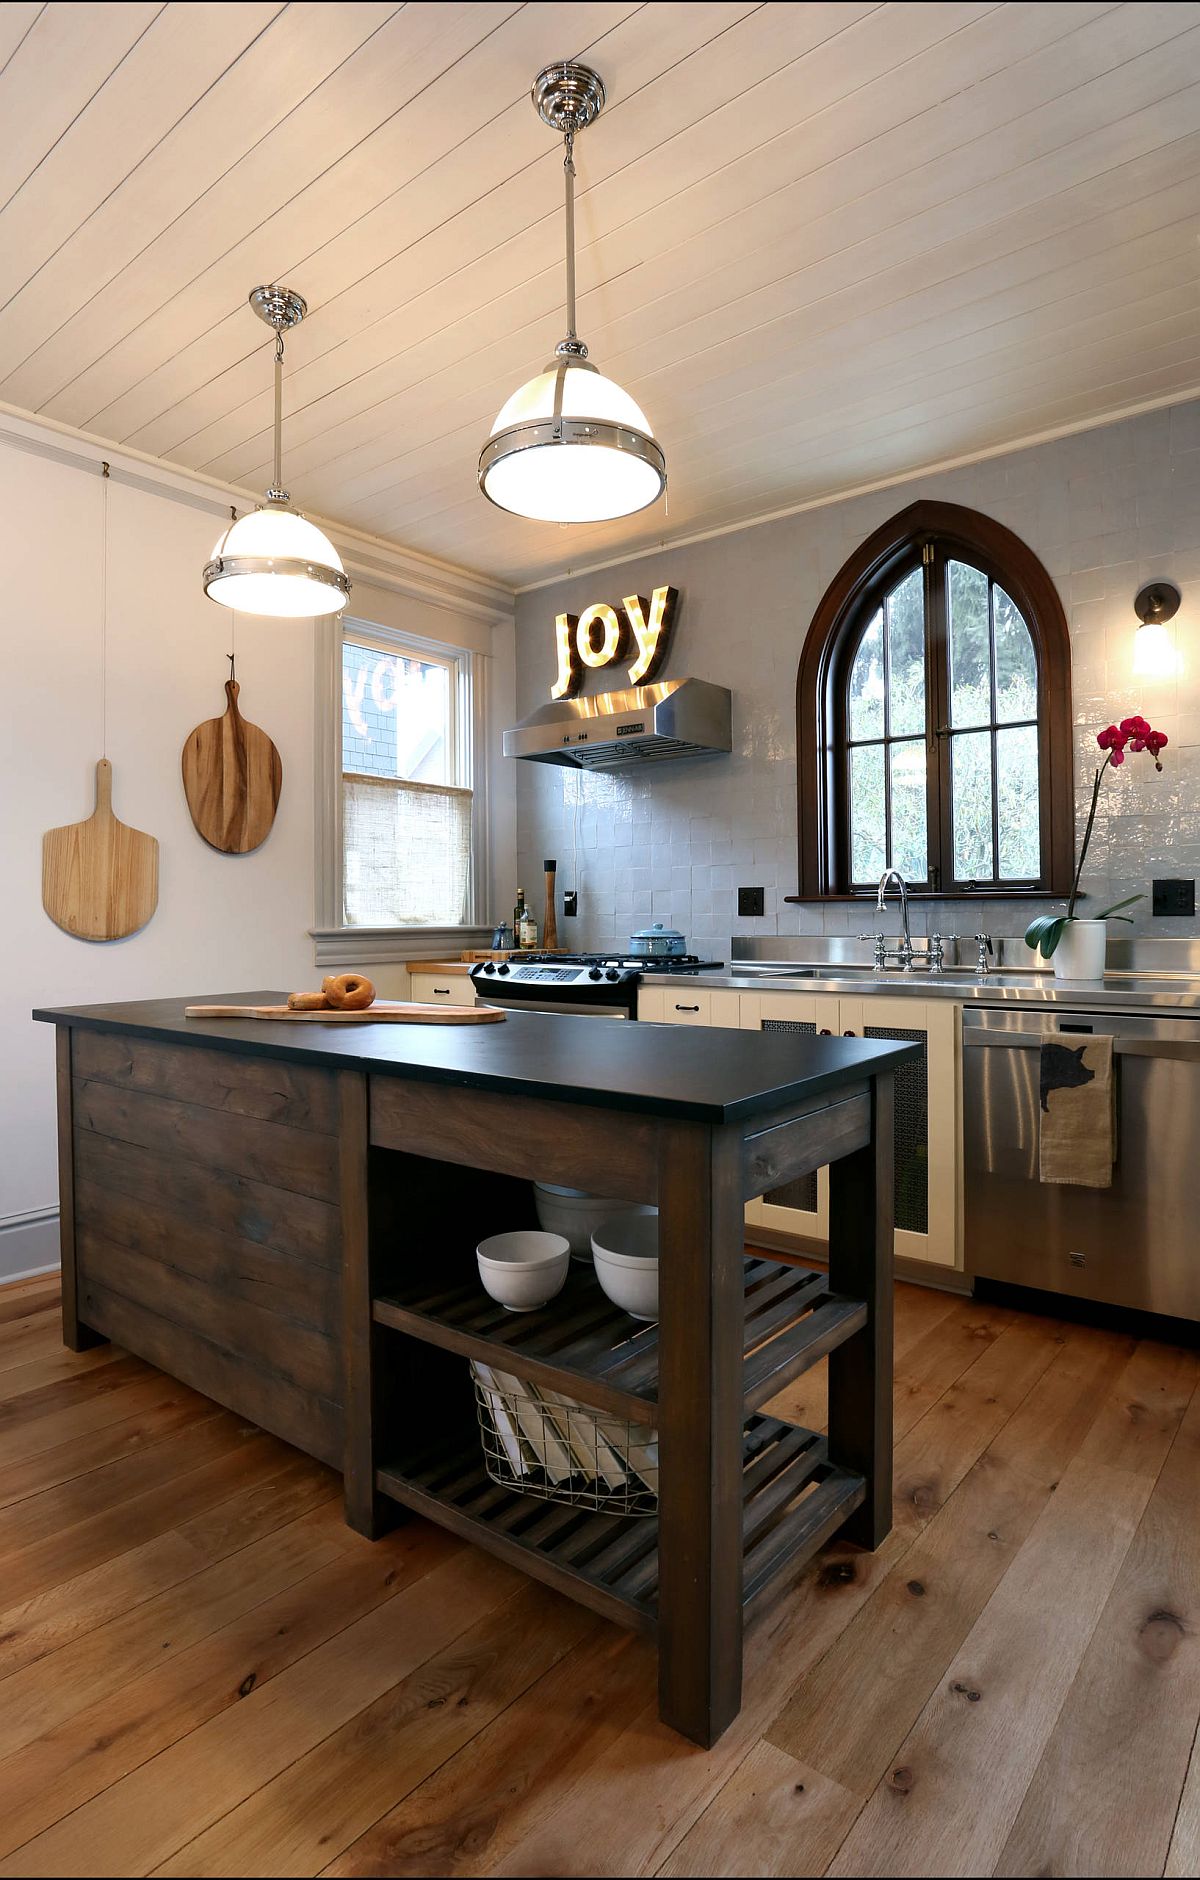 Modern-eclectic-touches-are-seamlessly-combined-with-Victorian-style-in-this-kitchen-59260